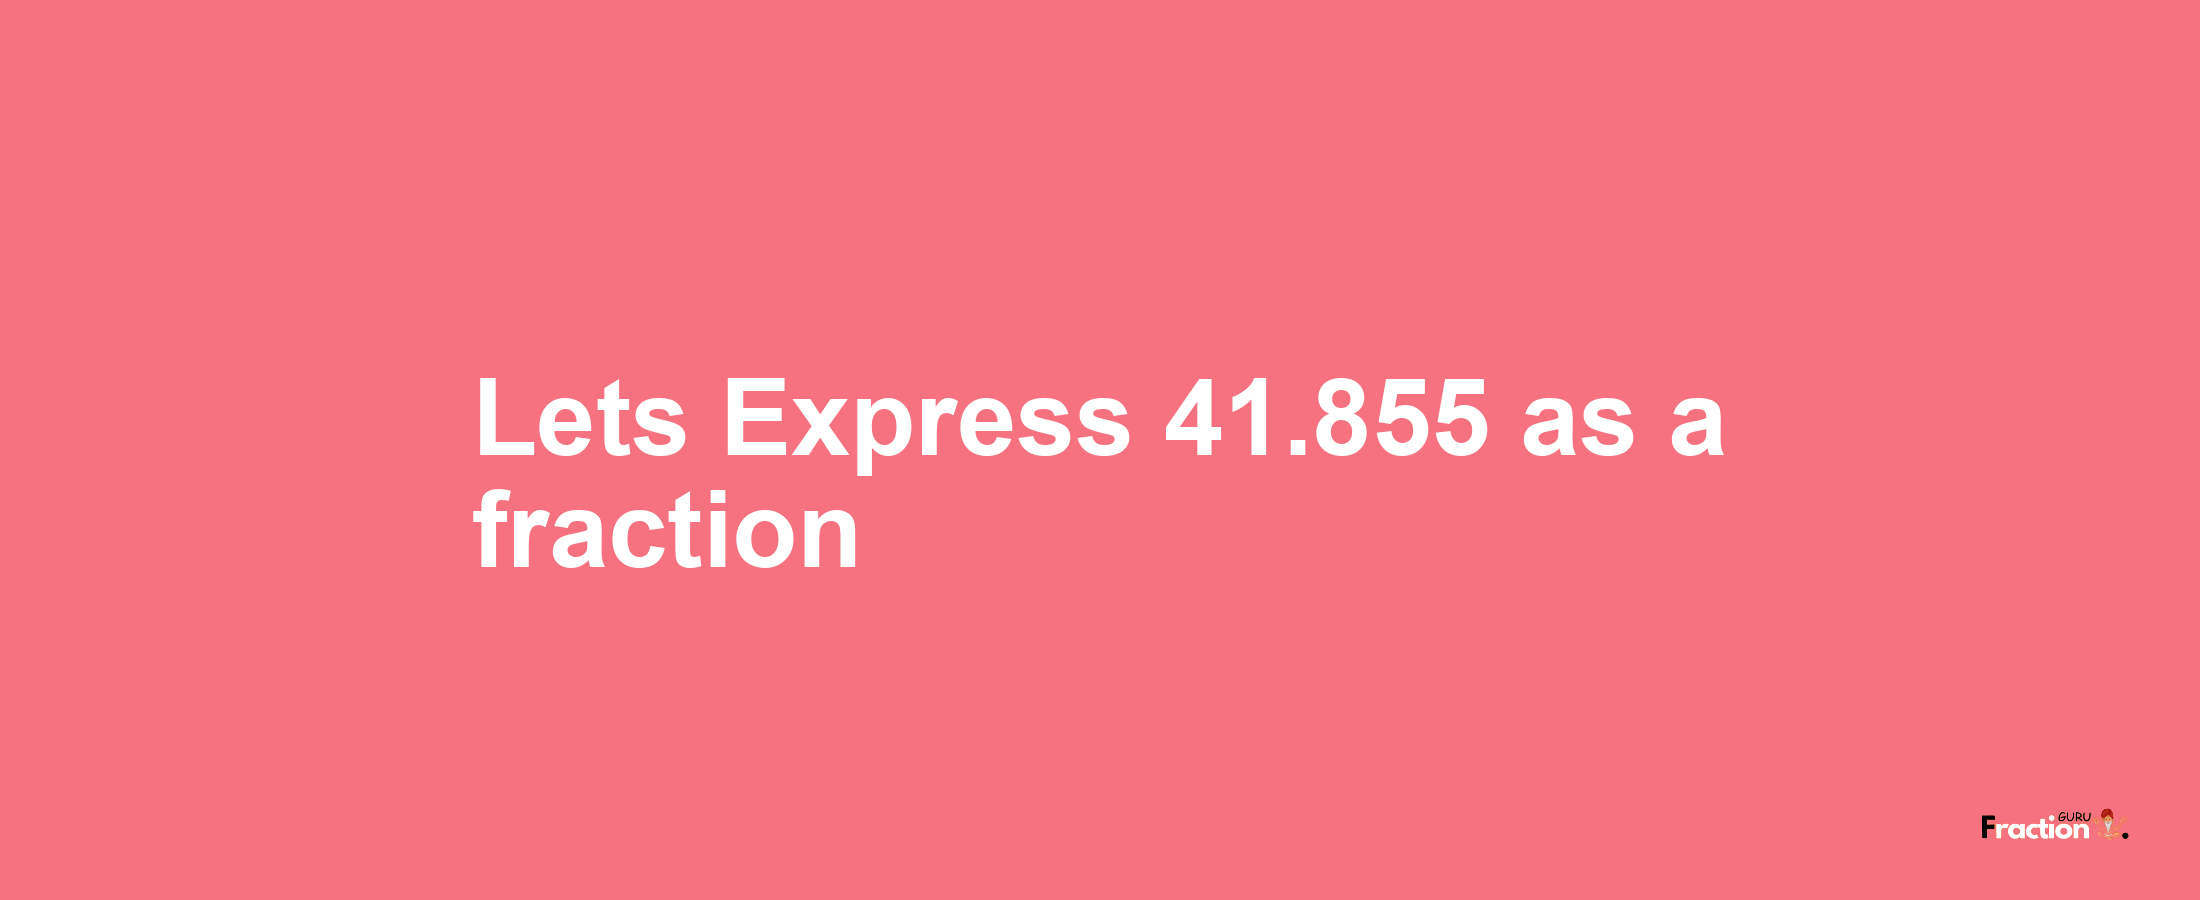 Lets Express 41.855 as afraction